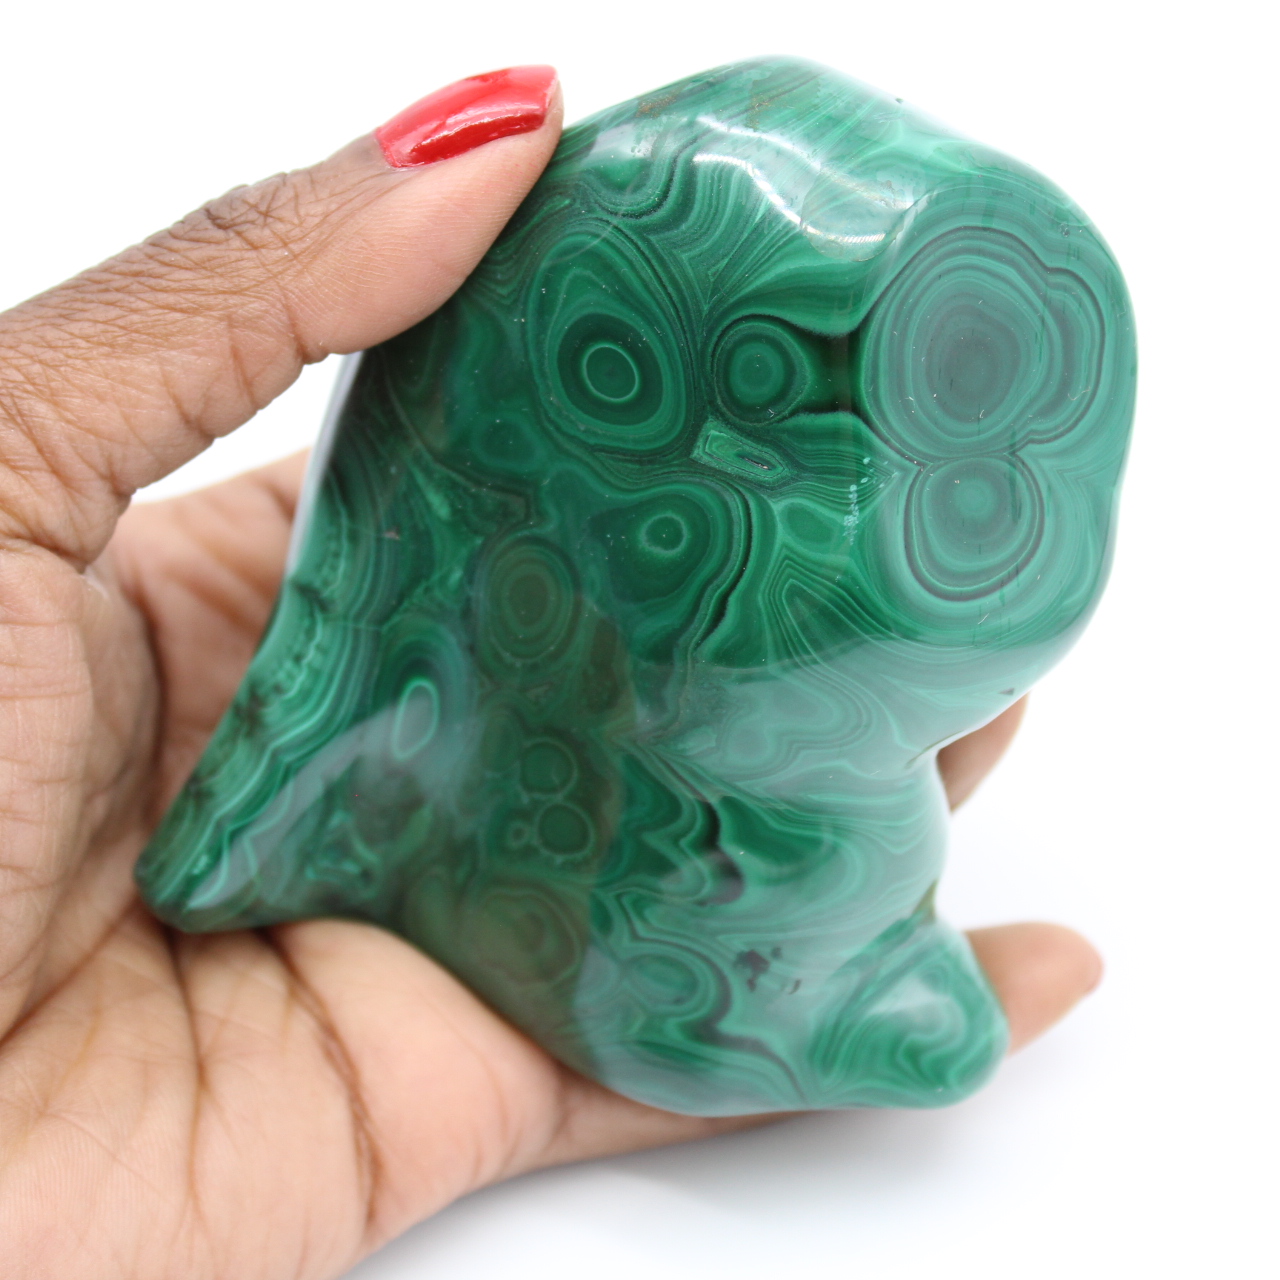 Malachite for collection